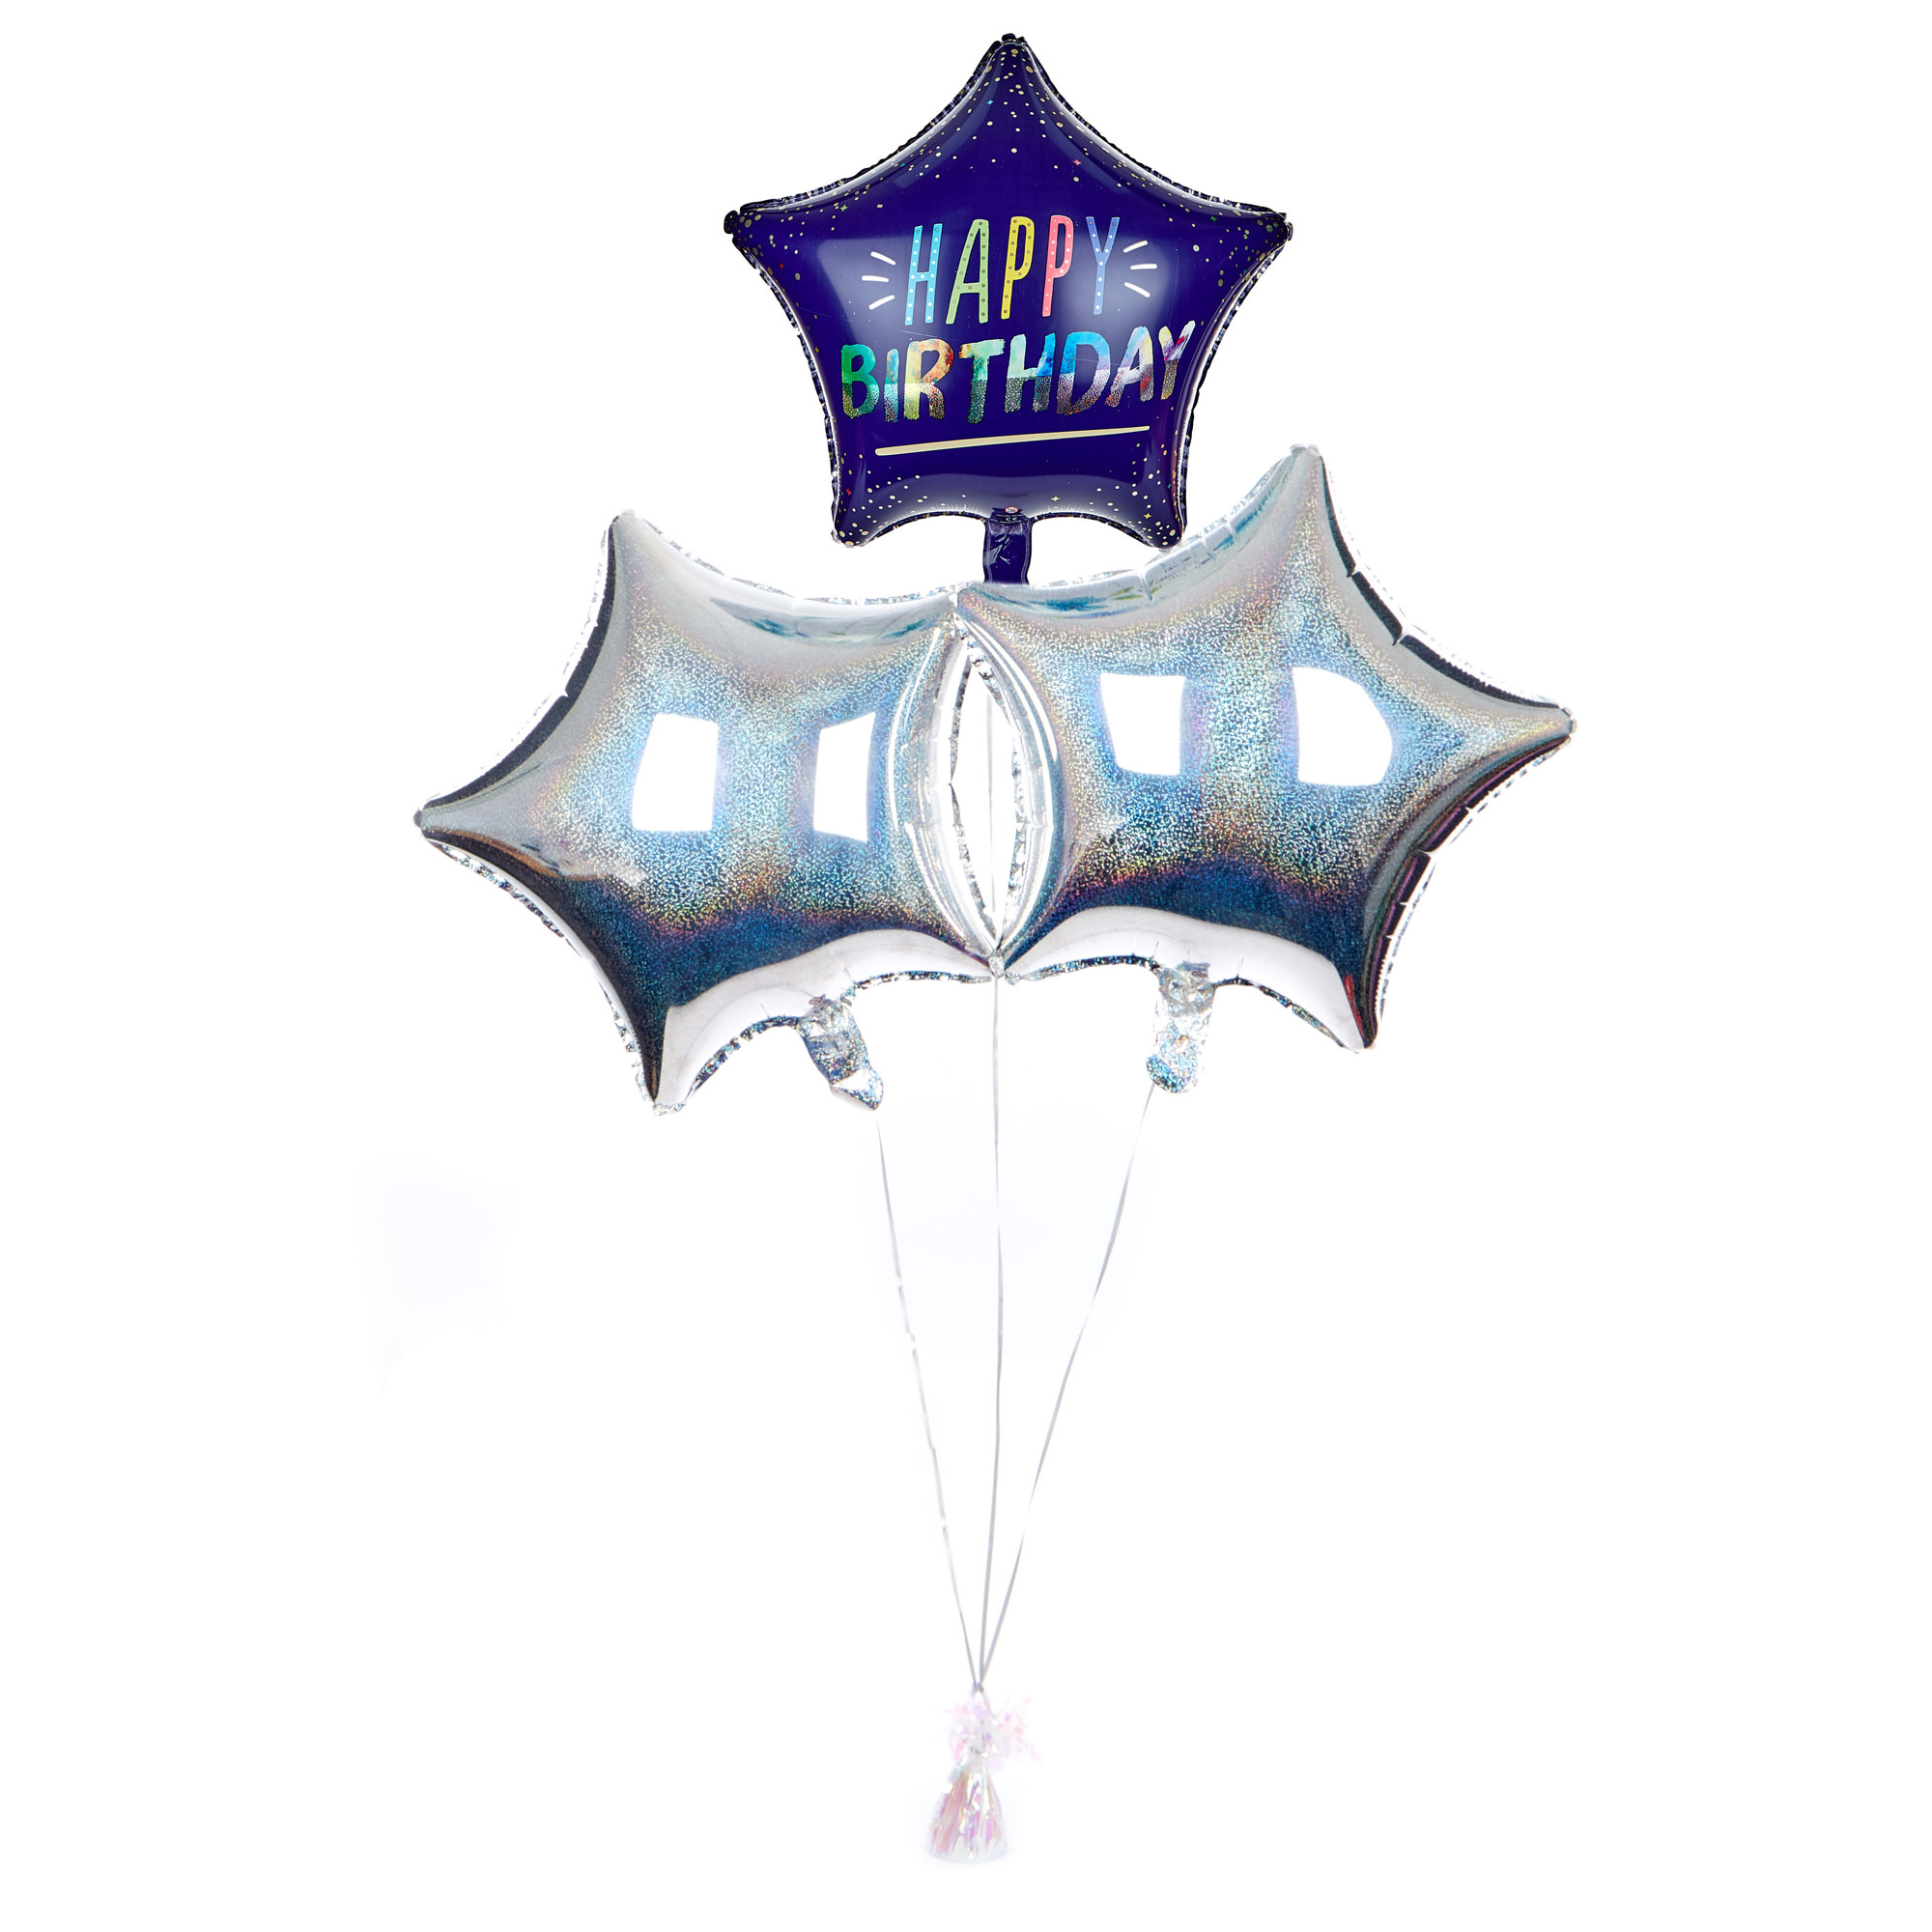 Star Happy Birthday Balloon Bouquet - DELIVERED INFLATED!